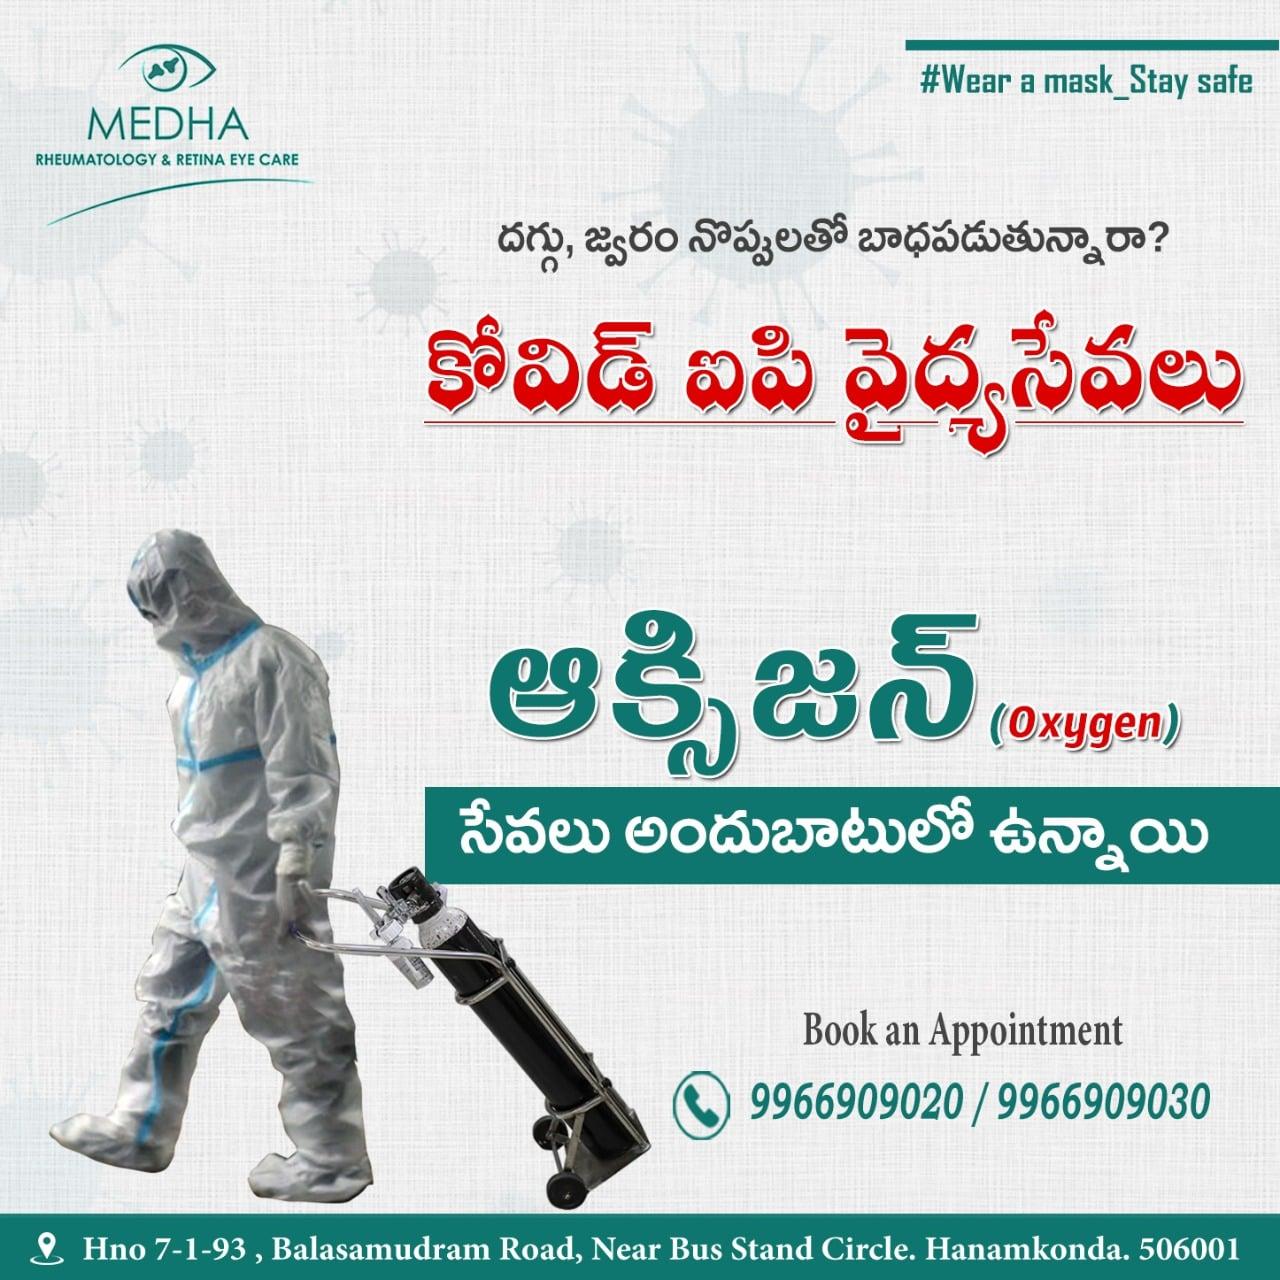 Your Safety is Our Top Priority.. supplying oxygen and also other all covid services to our patients who visits @medha!!